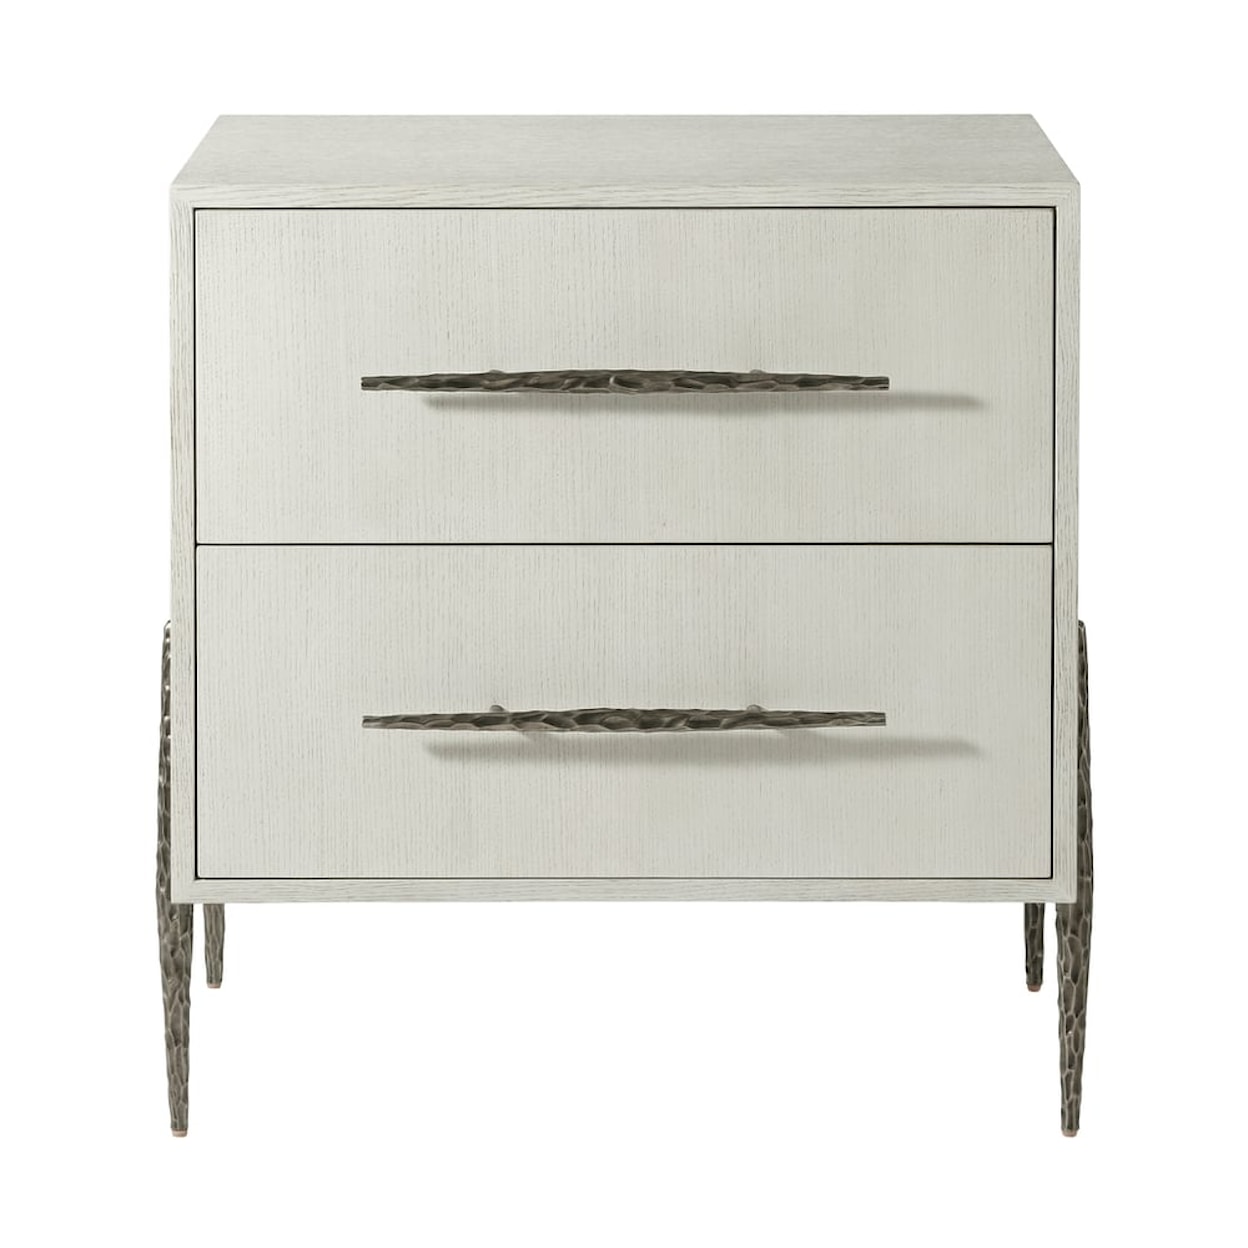 Theodore Alexander Essence Two Drawer Nightstand with Metal Legs